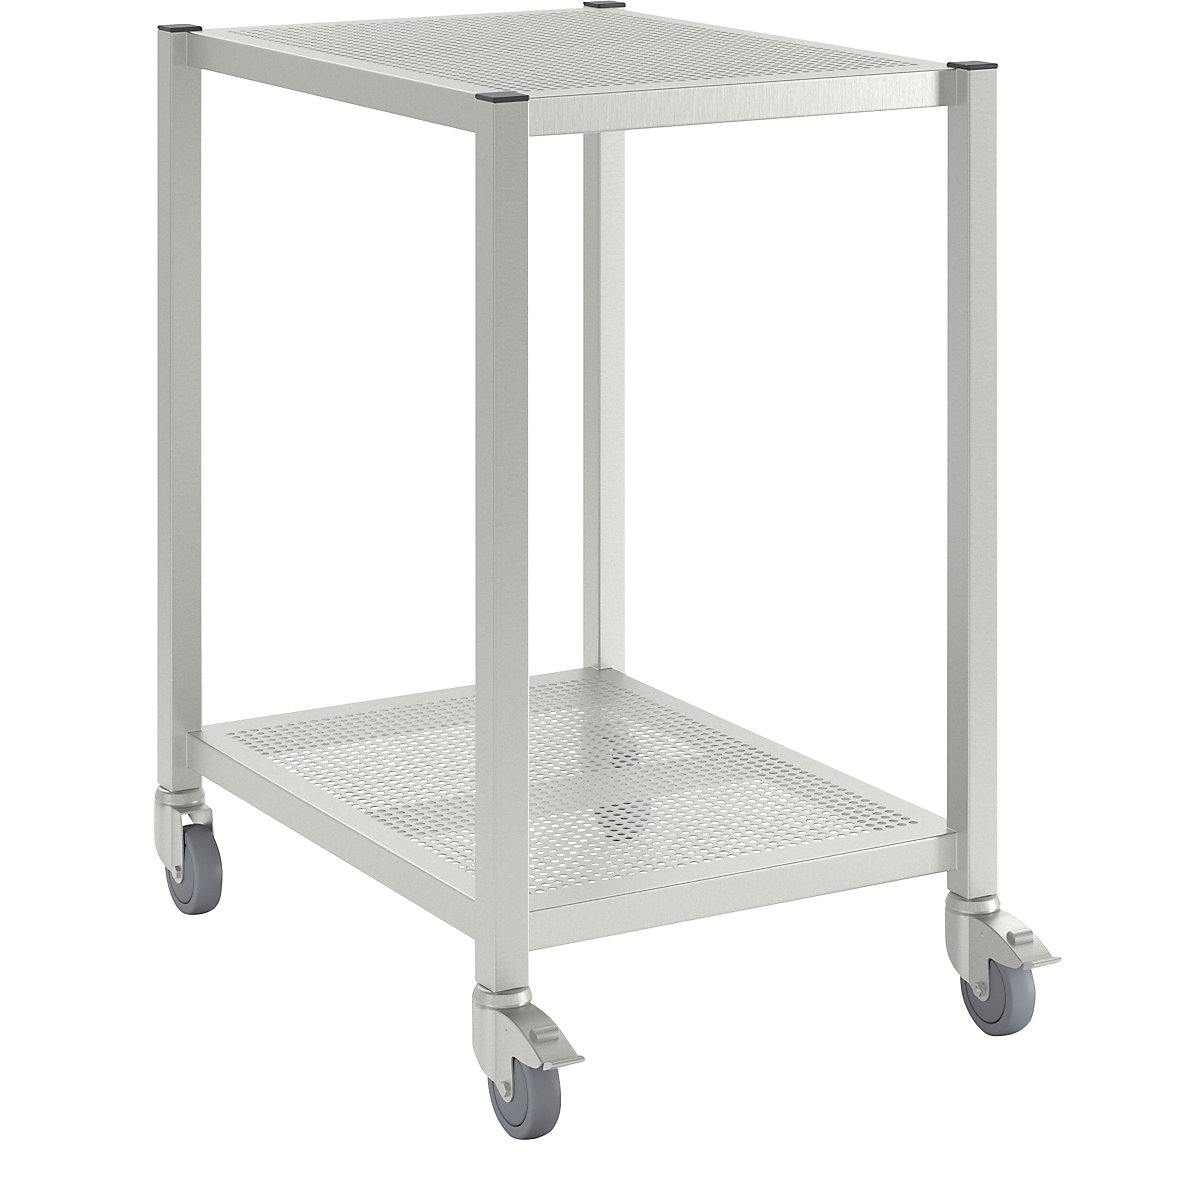 Mobile cleanroom table, made of stainless steel, 2 shelves, length 800 mm-12